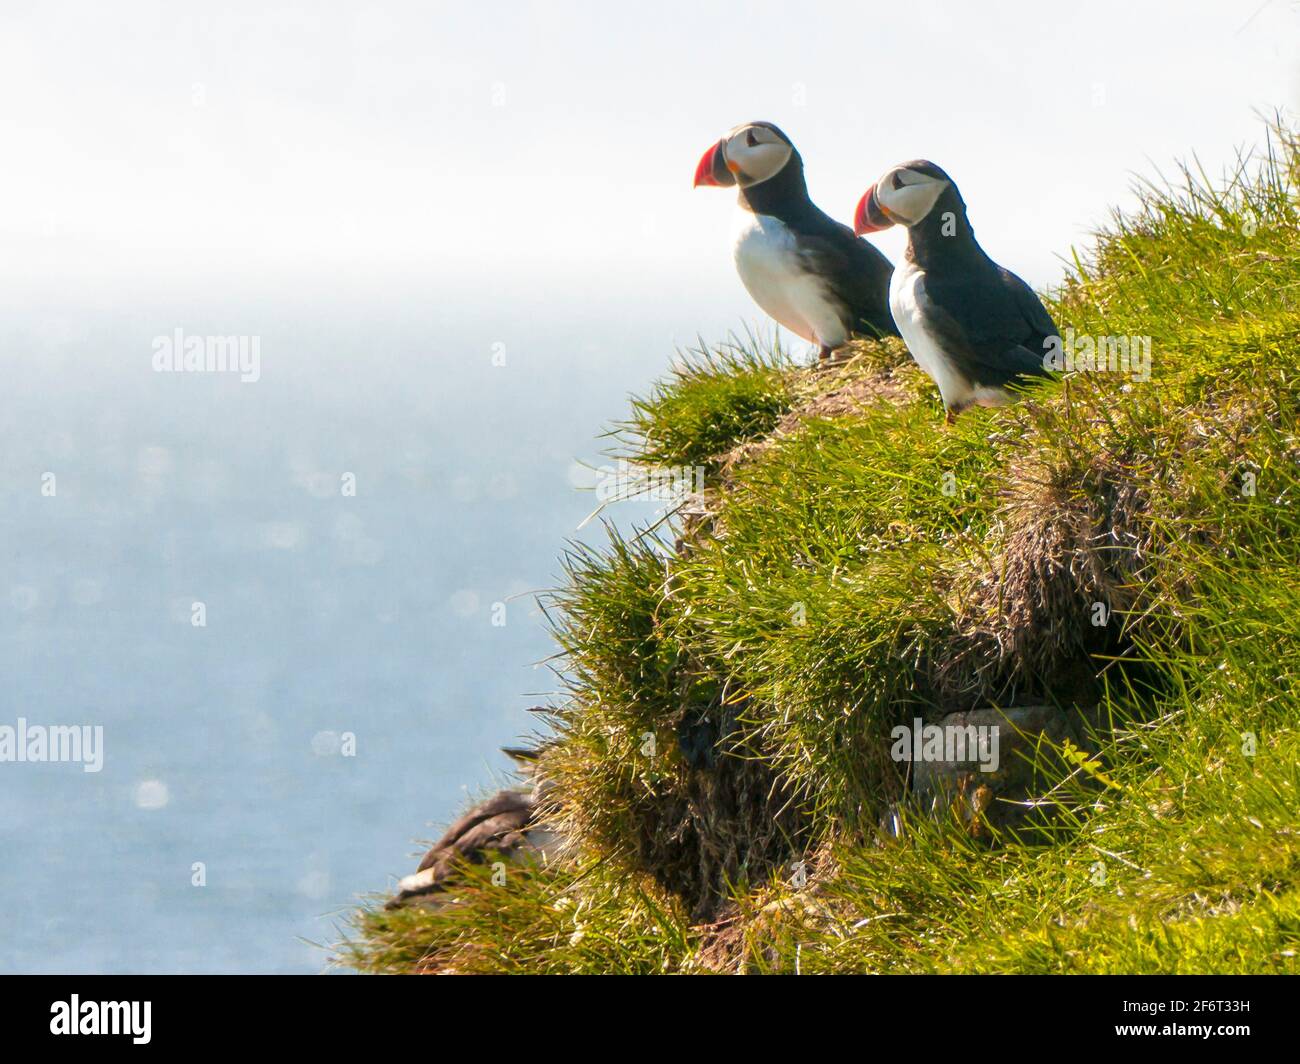 Puffins are any of three small species of alcids (auks) in the bird genus Fratercula with a brightly coloured beak during the breeding season. These Stock Photo